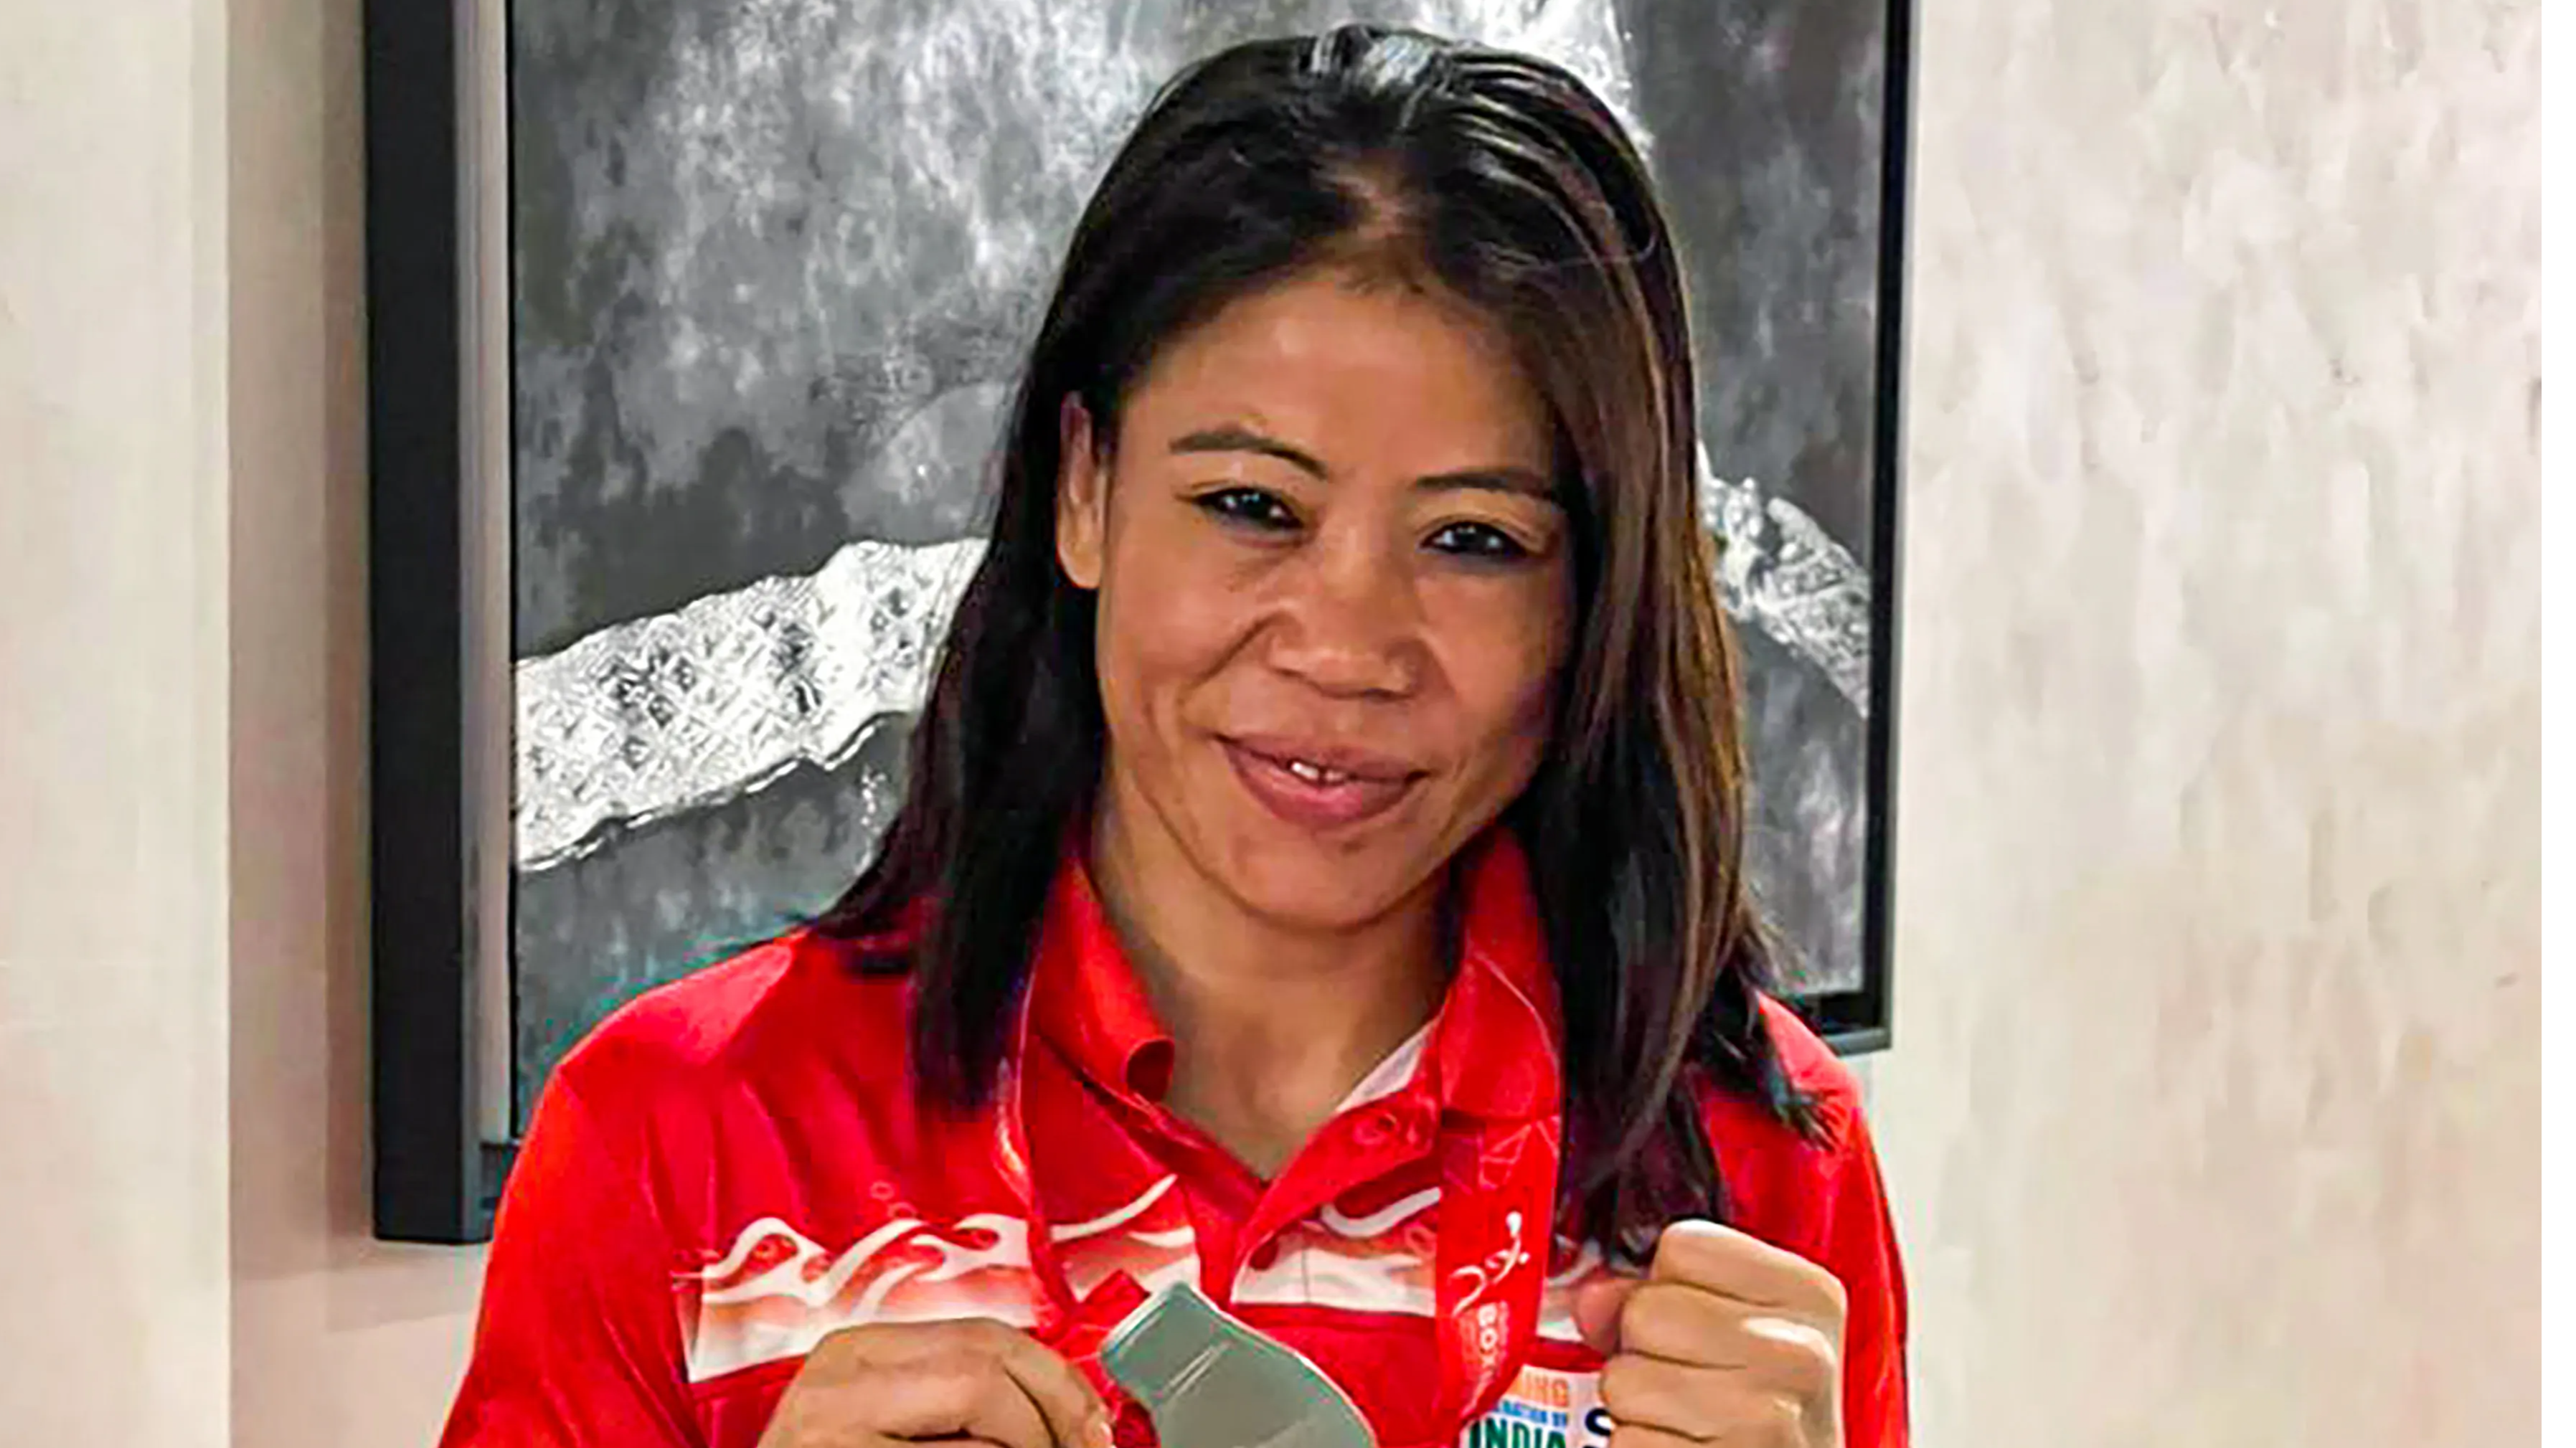 What is Mary Kom’s age?